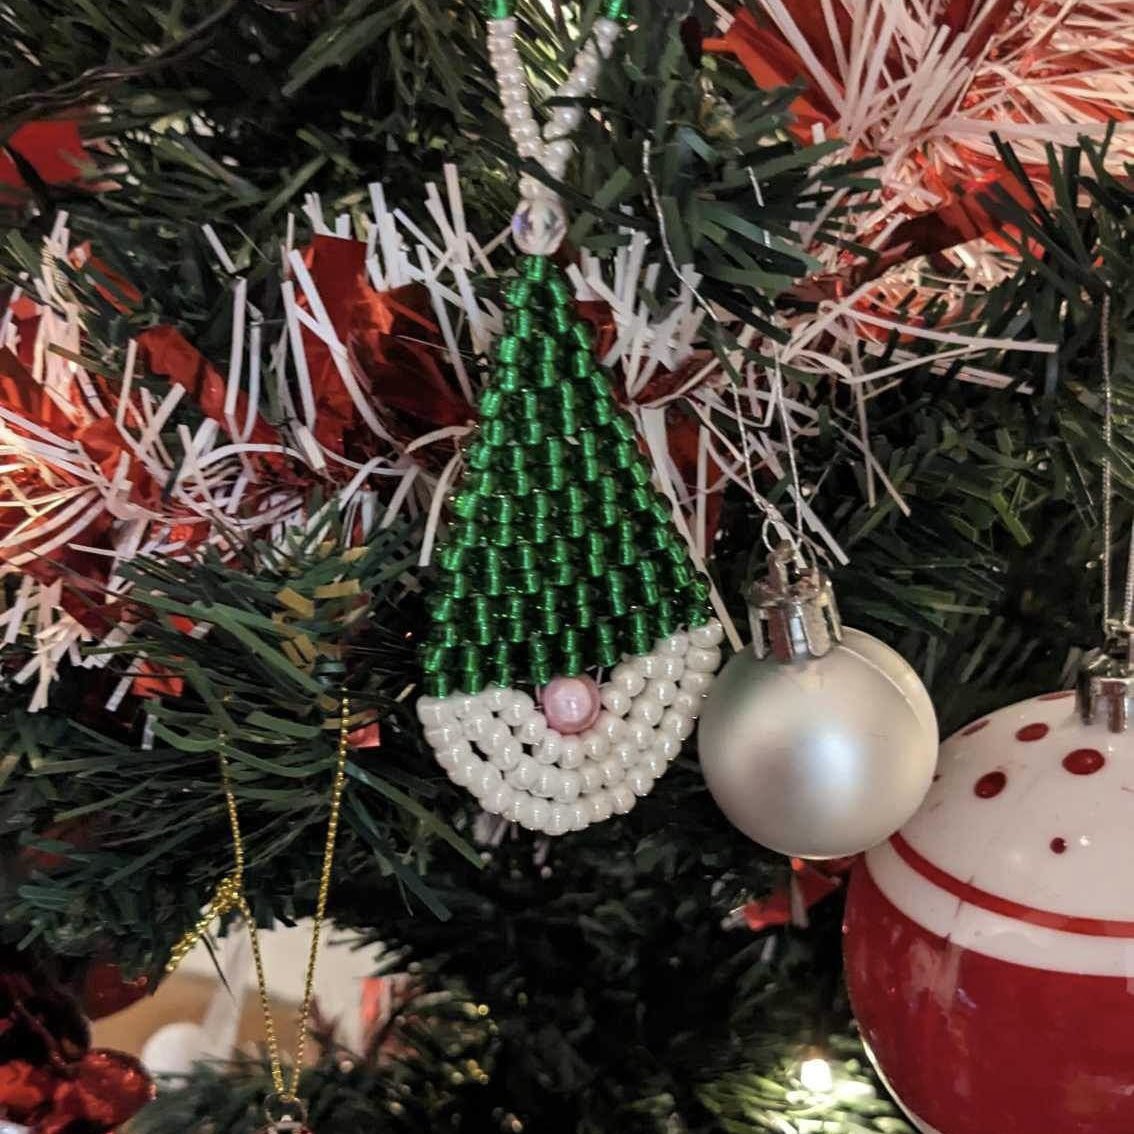 Have you a photo of your Jude’s BeadWitchery Christmas decoration on your tree? Please share a photo as I’d love to make a collage of them all #Santa #christmasdecorations #handmadechristmas #gonksarenotjustforchristmas #SantaGonk